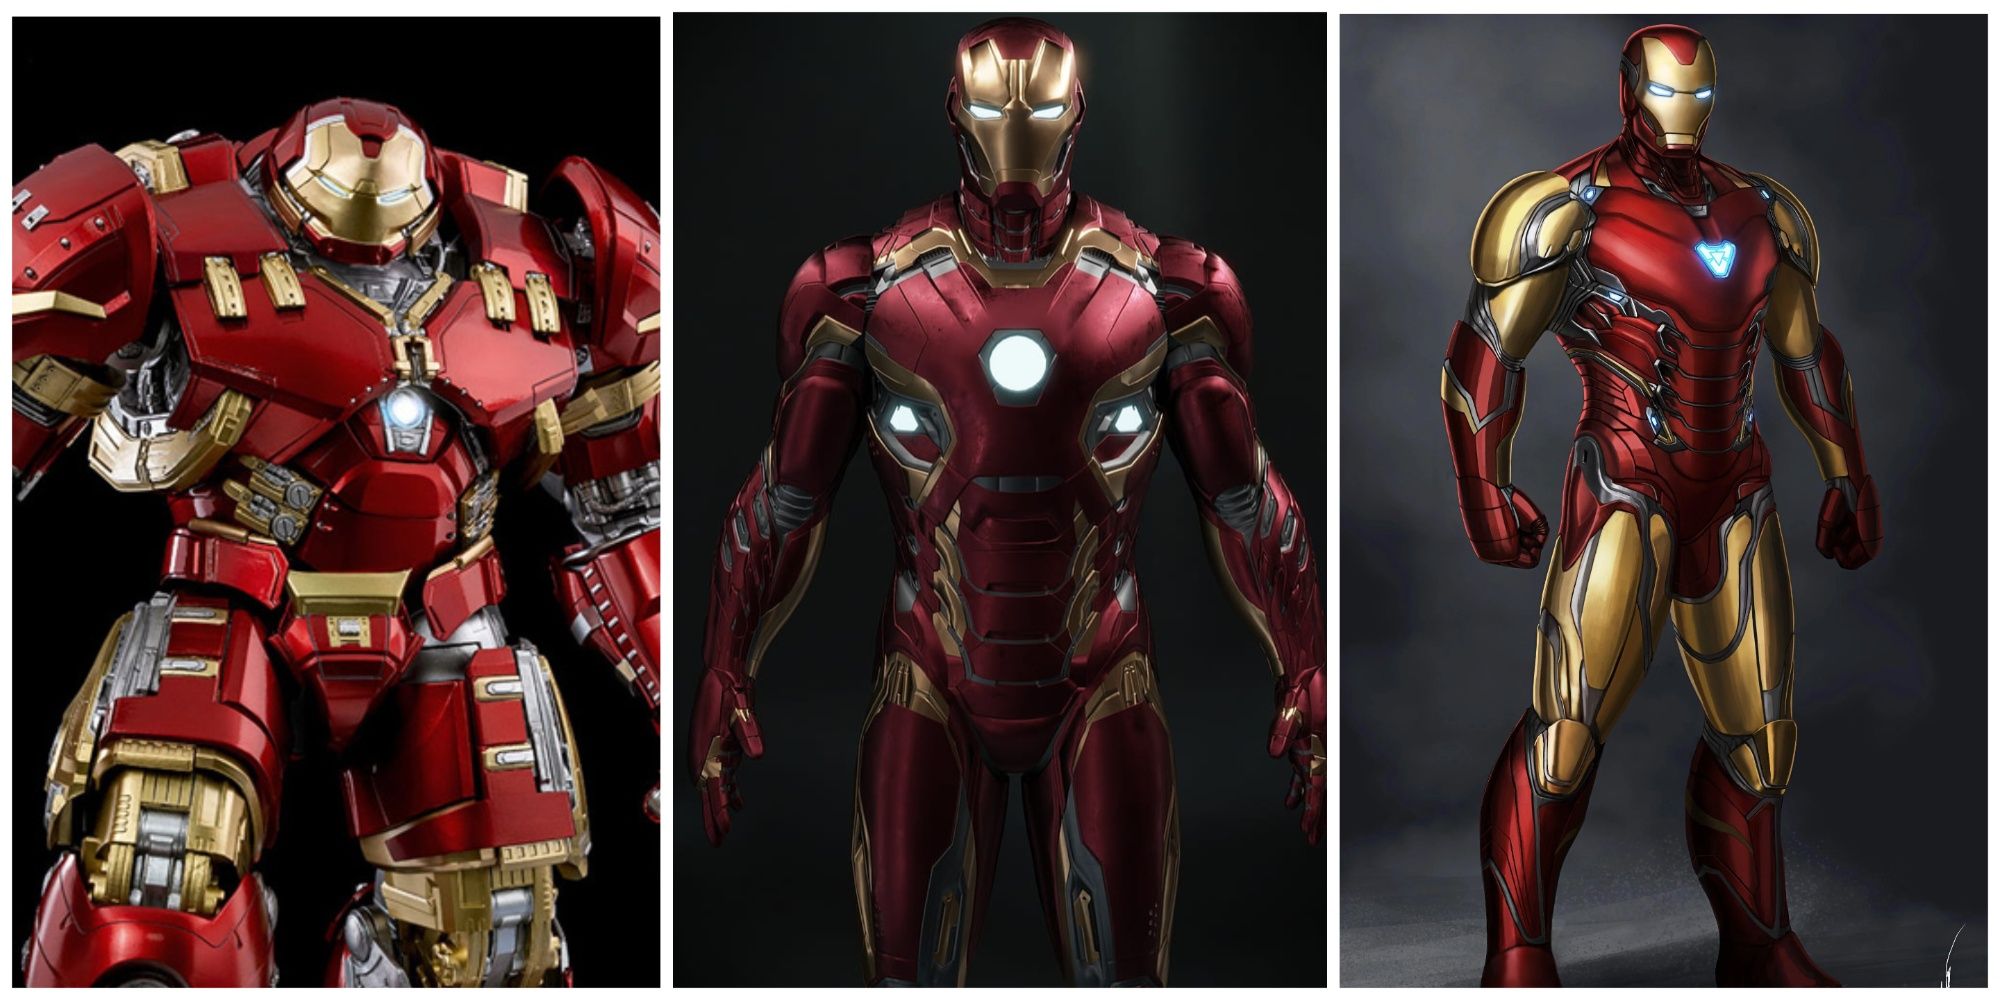 Marvel's Avengers' Iron Man Is Getting His 2012 Movie Armor